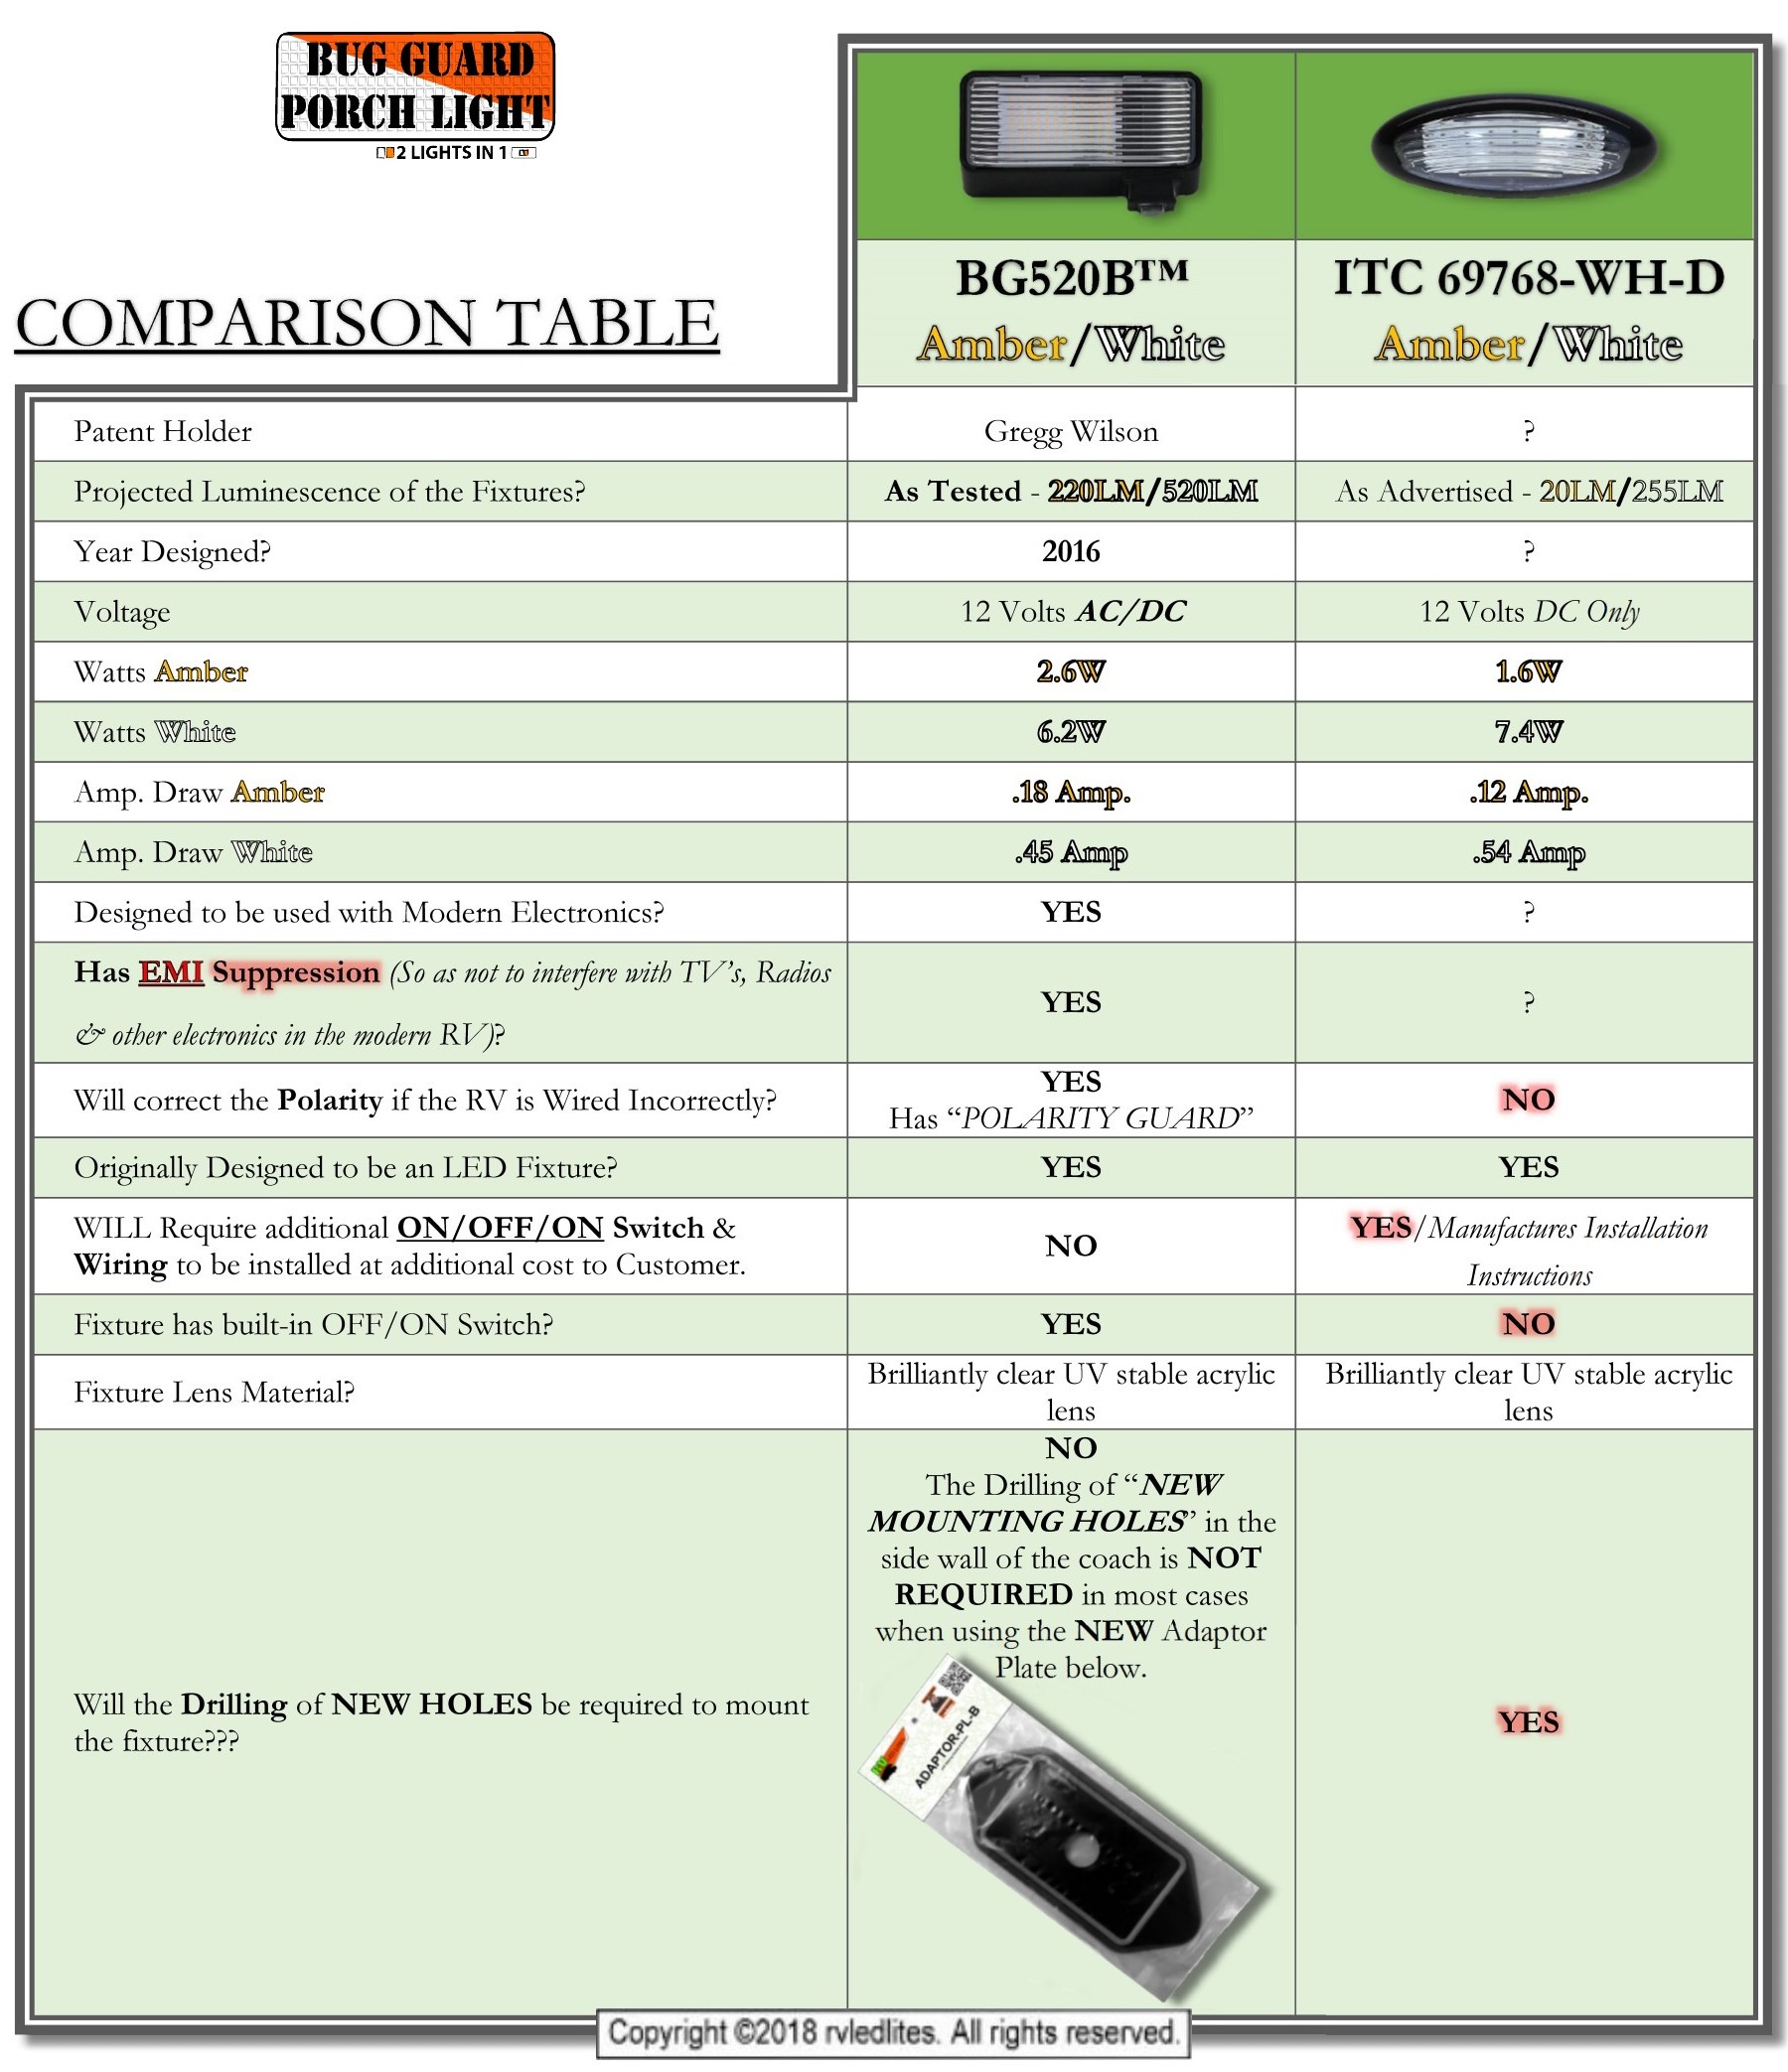 A Table that shows the big differences between the BG520 and the ITC 69768-WH-D and please note that unlike the BG520 Porch Light fixture, the ITC 69768-WH-D requires an additional switch and wiring to be installed at an addition cost for this fixture to operate. :-(